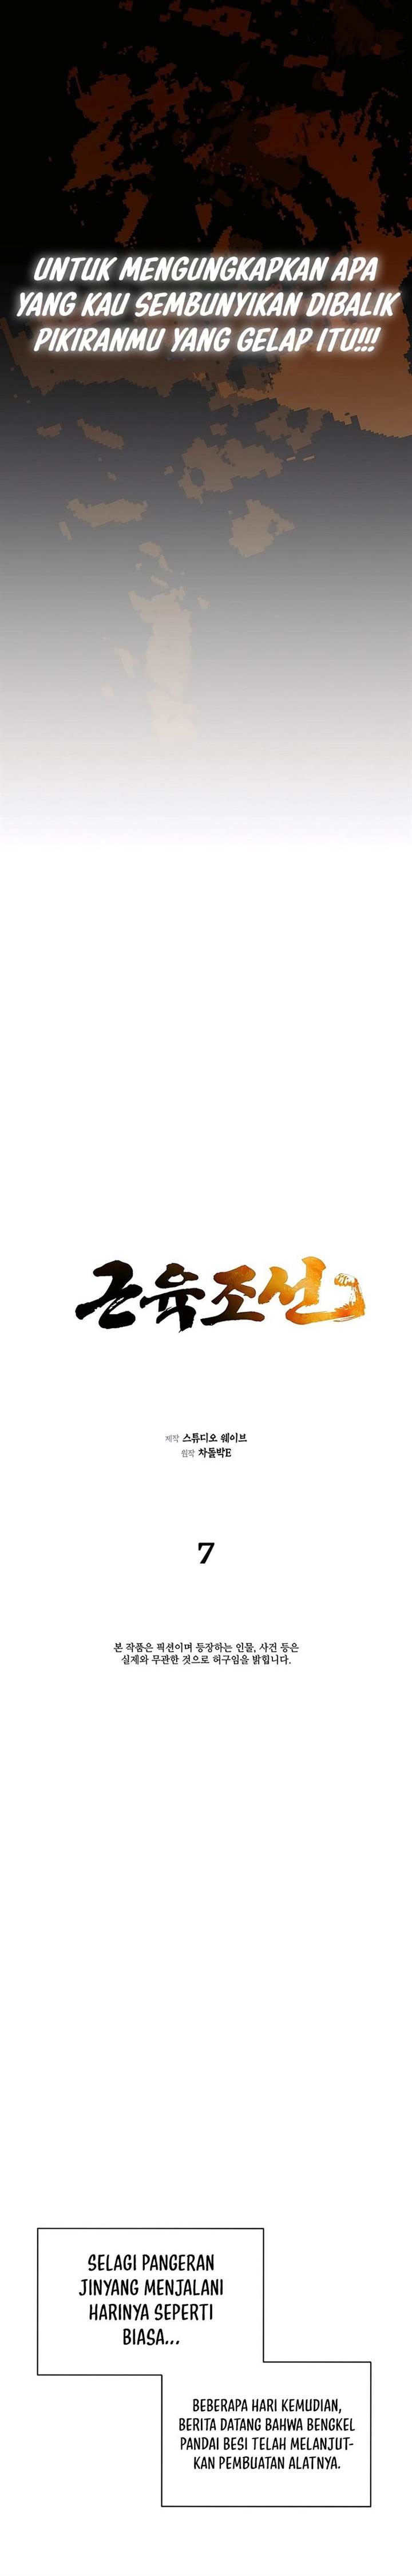 Muscle Joseon Chapter 7